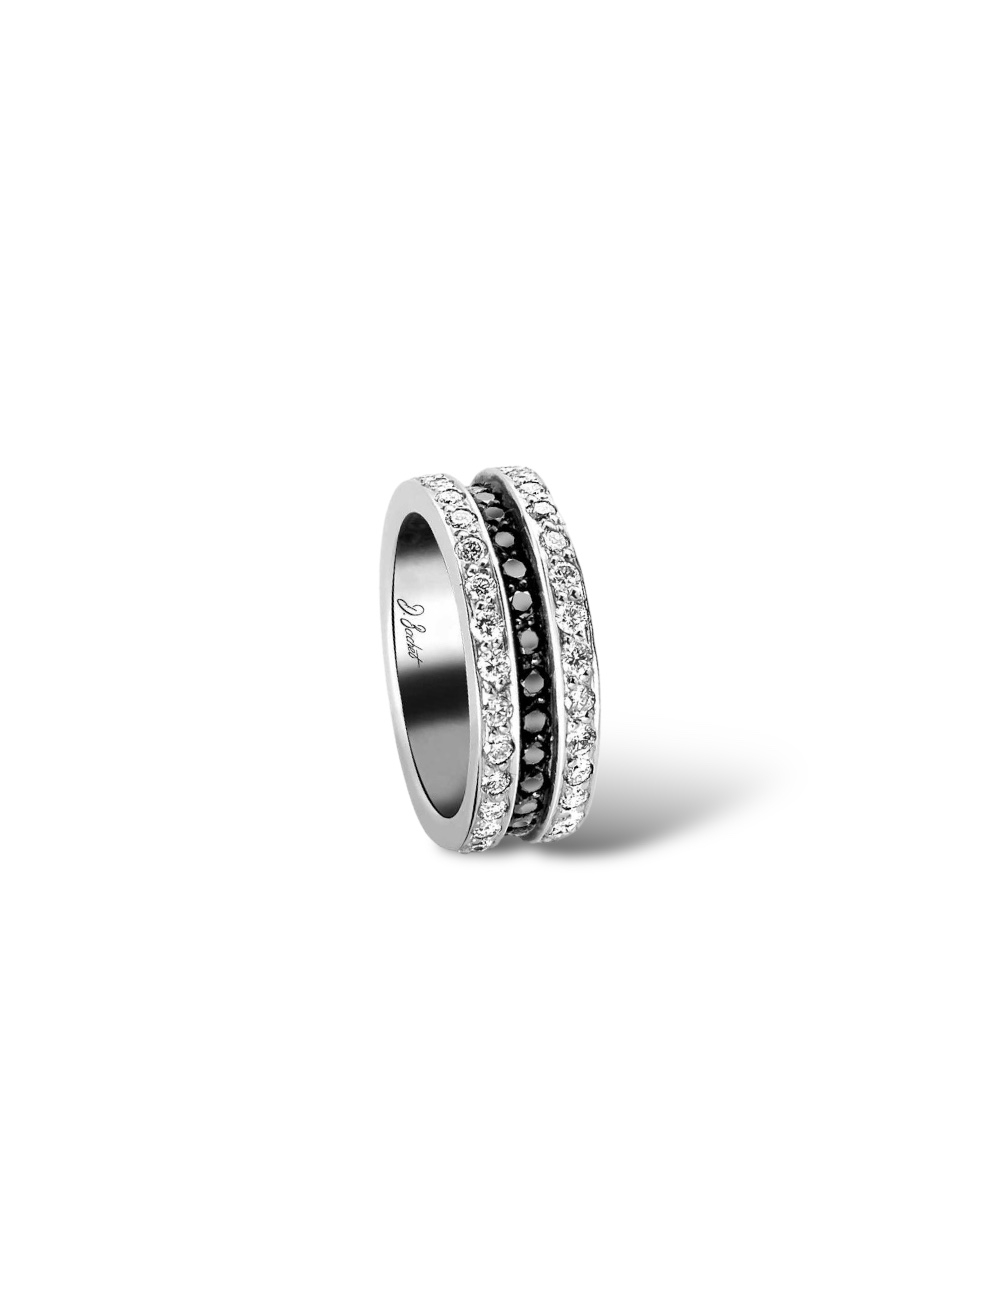 Scroll in Love platinum wedding band for women, showcasing a full circle of grain-set white and black diamonds.